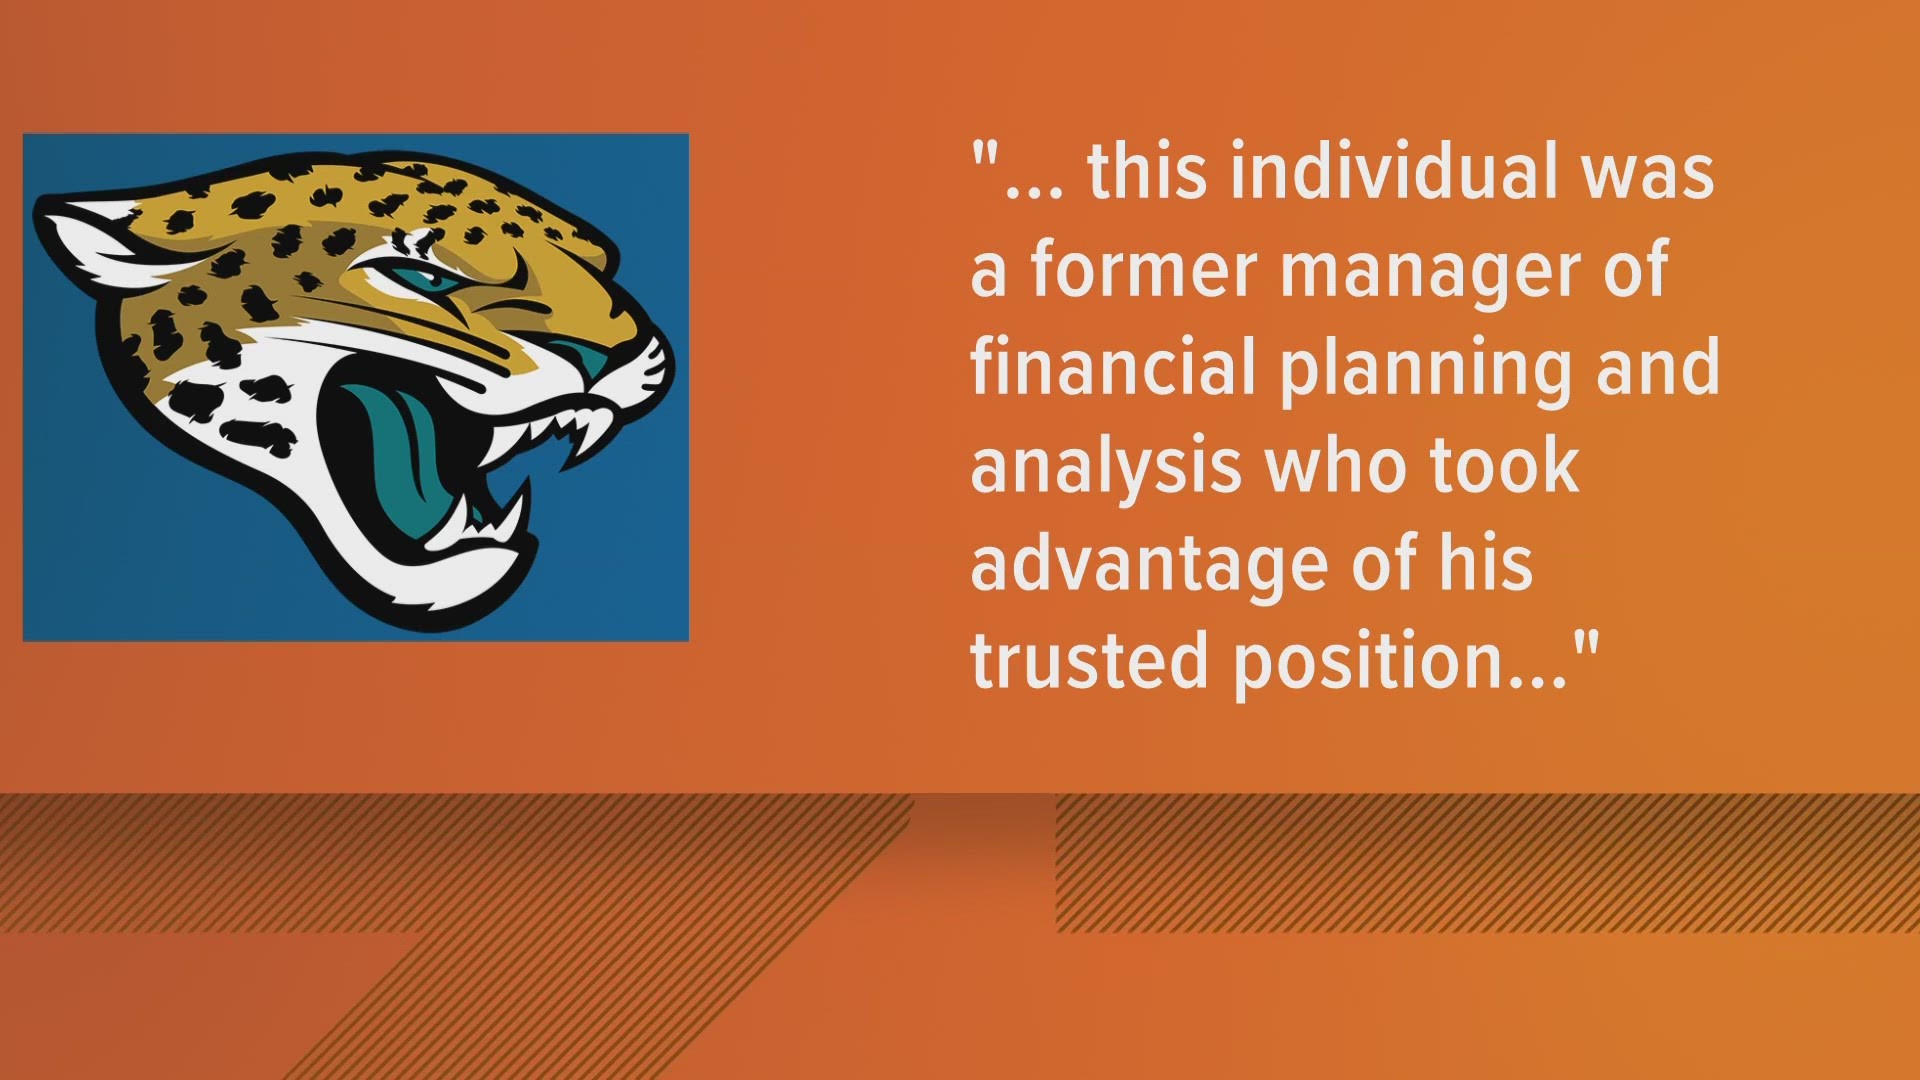 Amit Patel, a former manager of financial planning and analysis worked for the team for about five years.